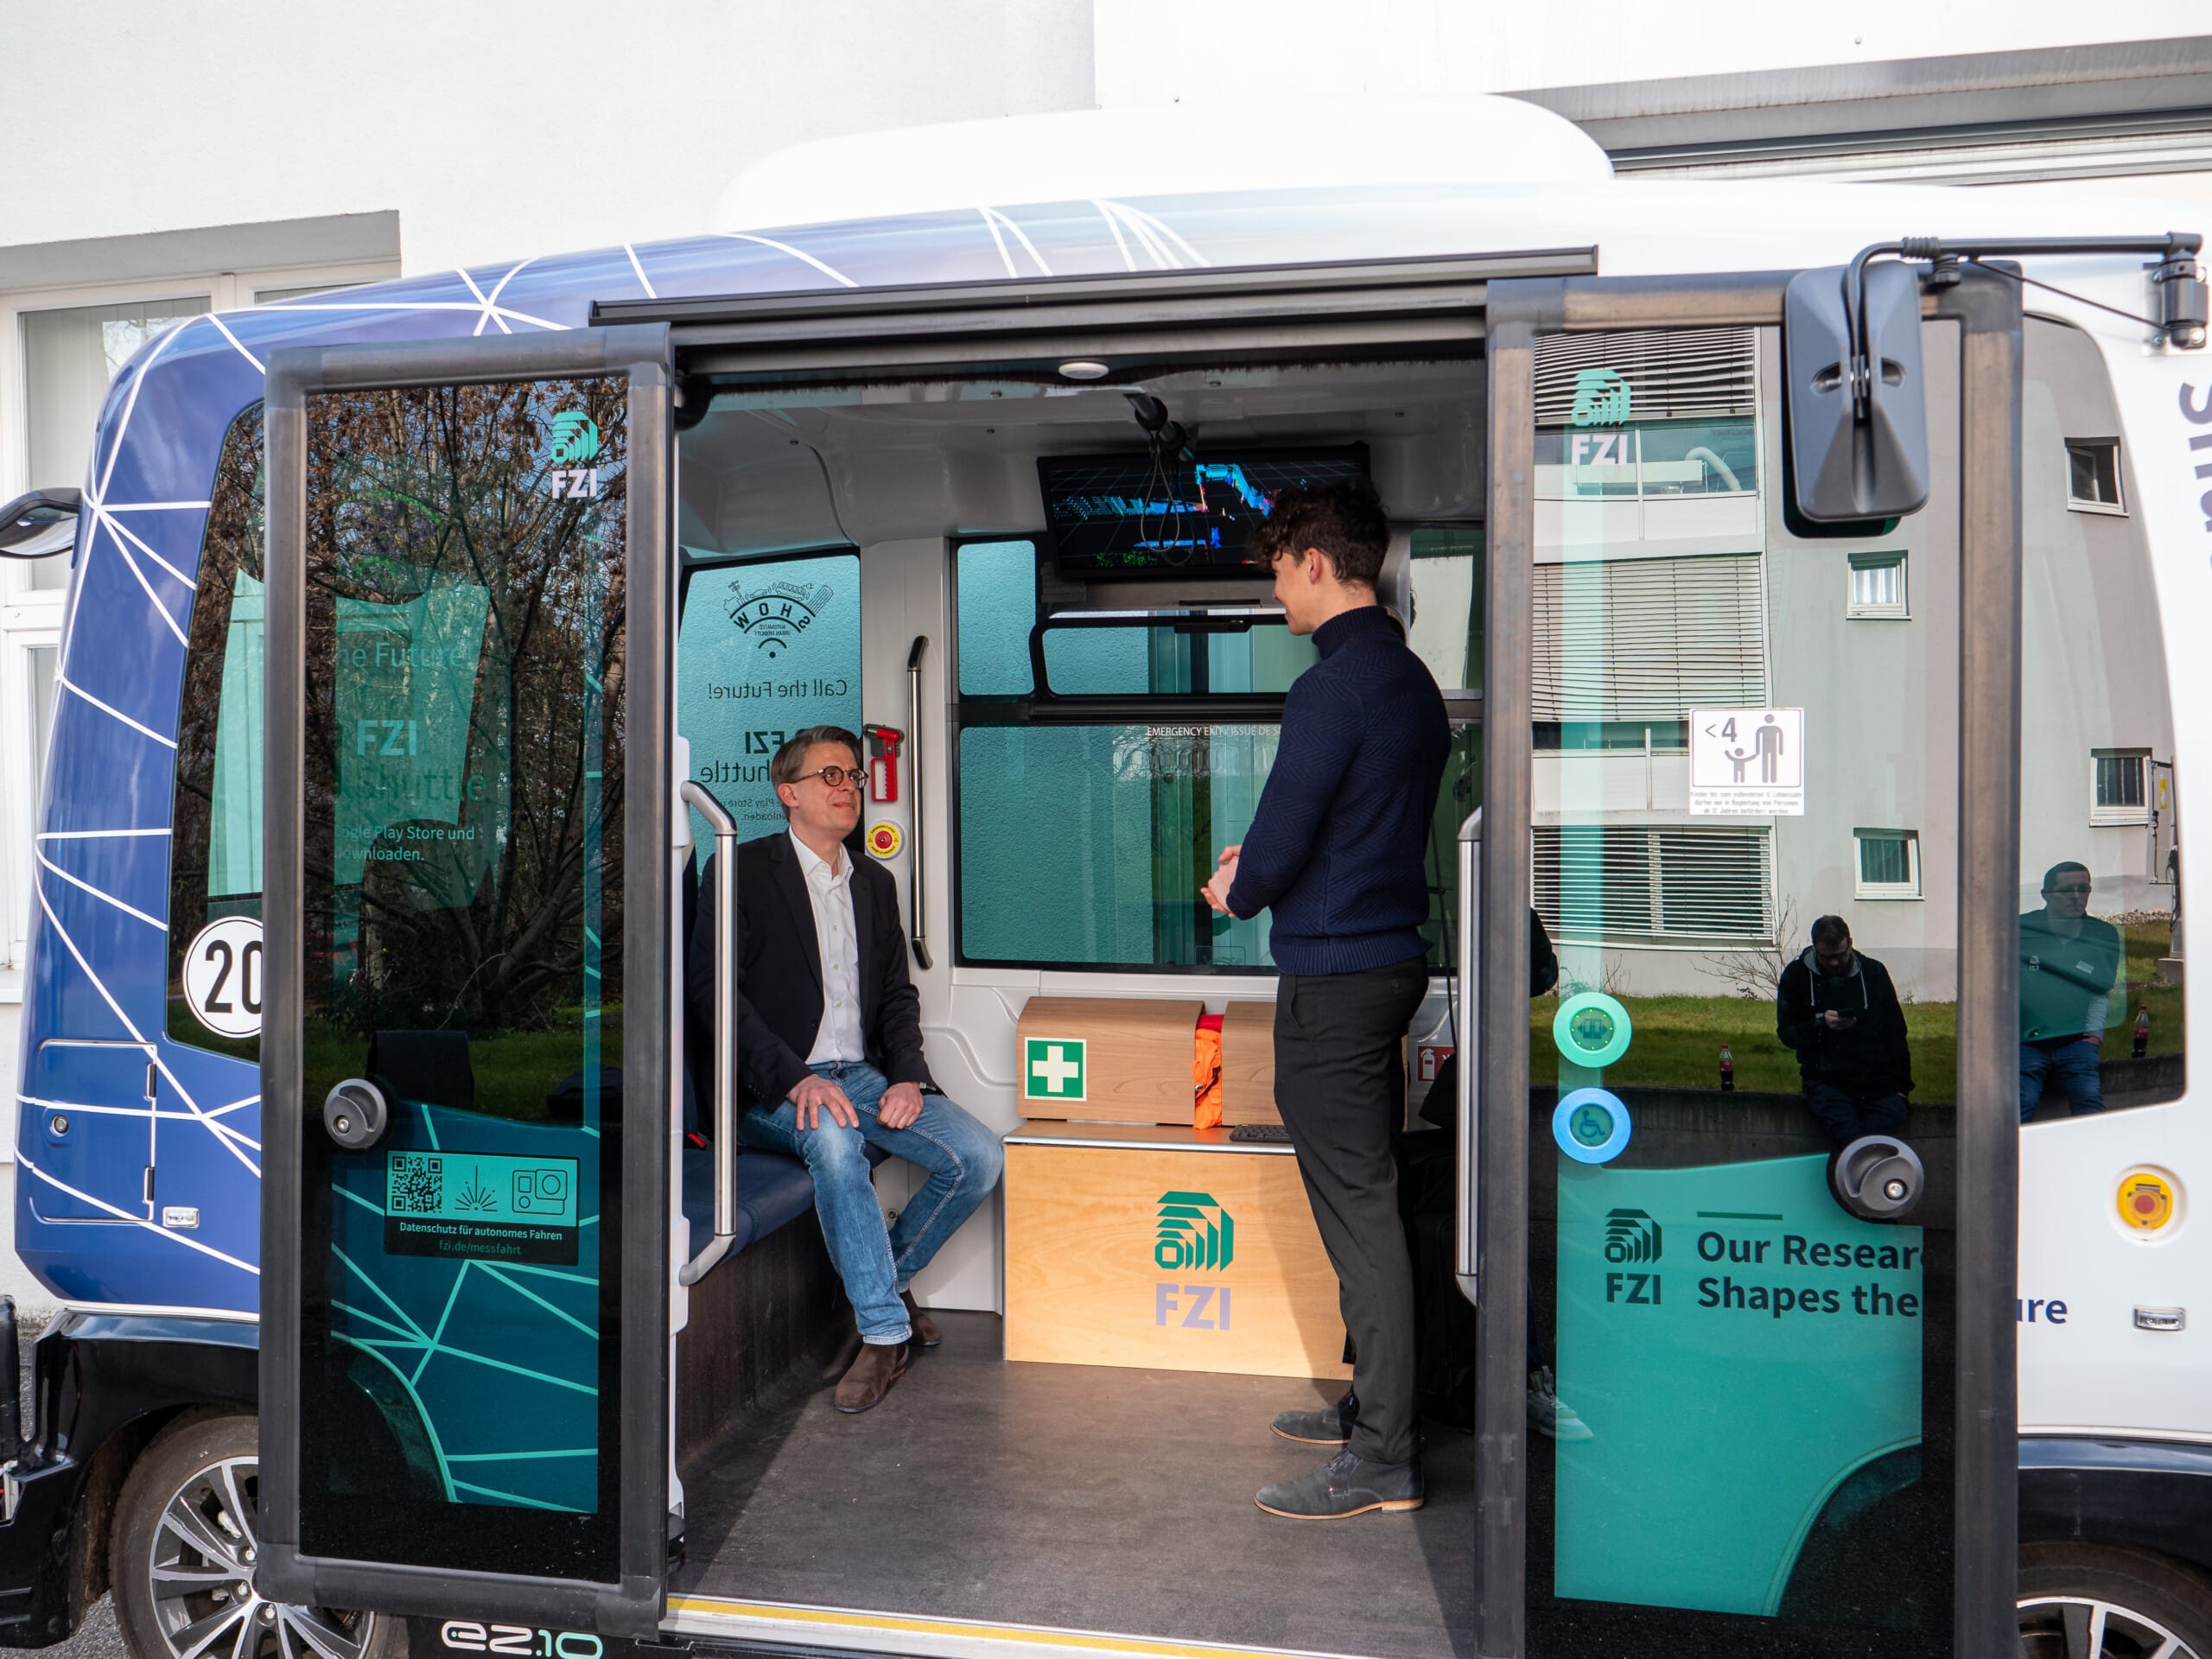 The self-driving EVA shuttle bus, which can be booked via app for a free ride in the Weiherfeld-Dammerstock test area again from March 2023, could be experienced at the FZI Open House 2023. Photo: Netzoptimisten.